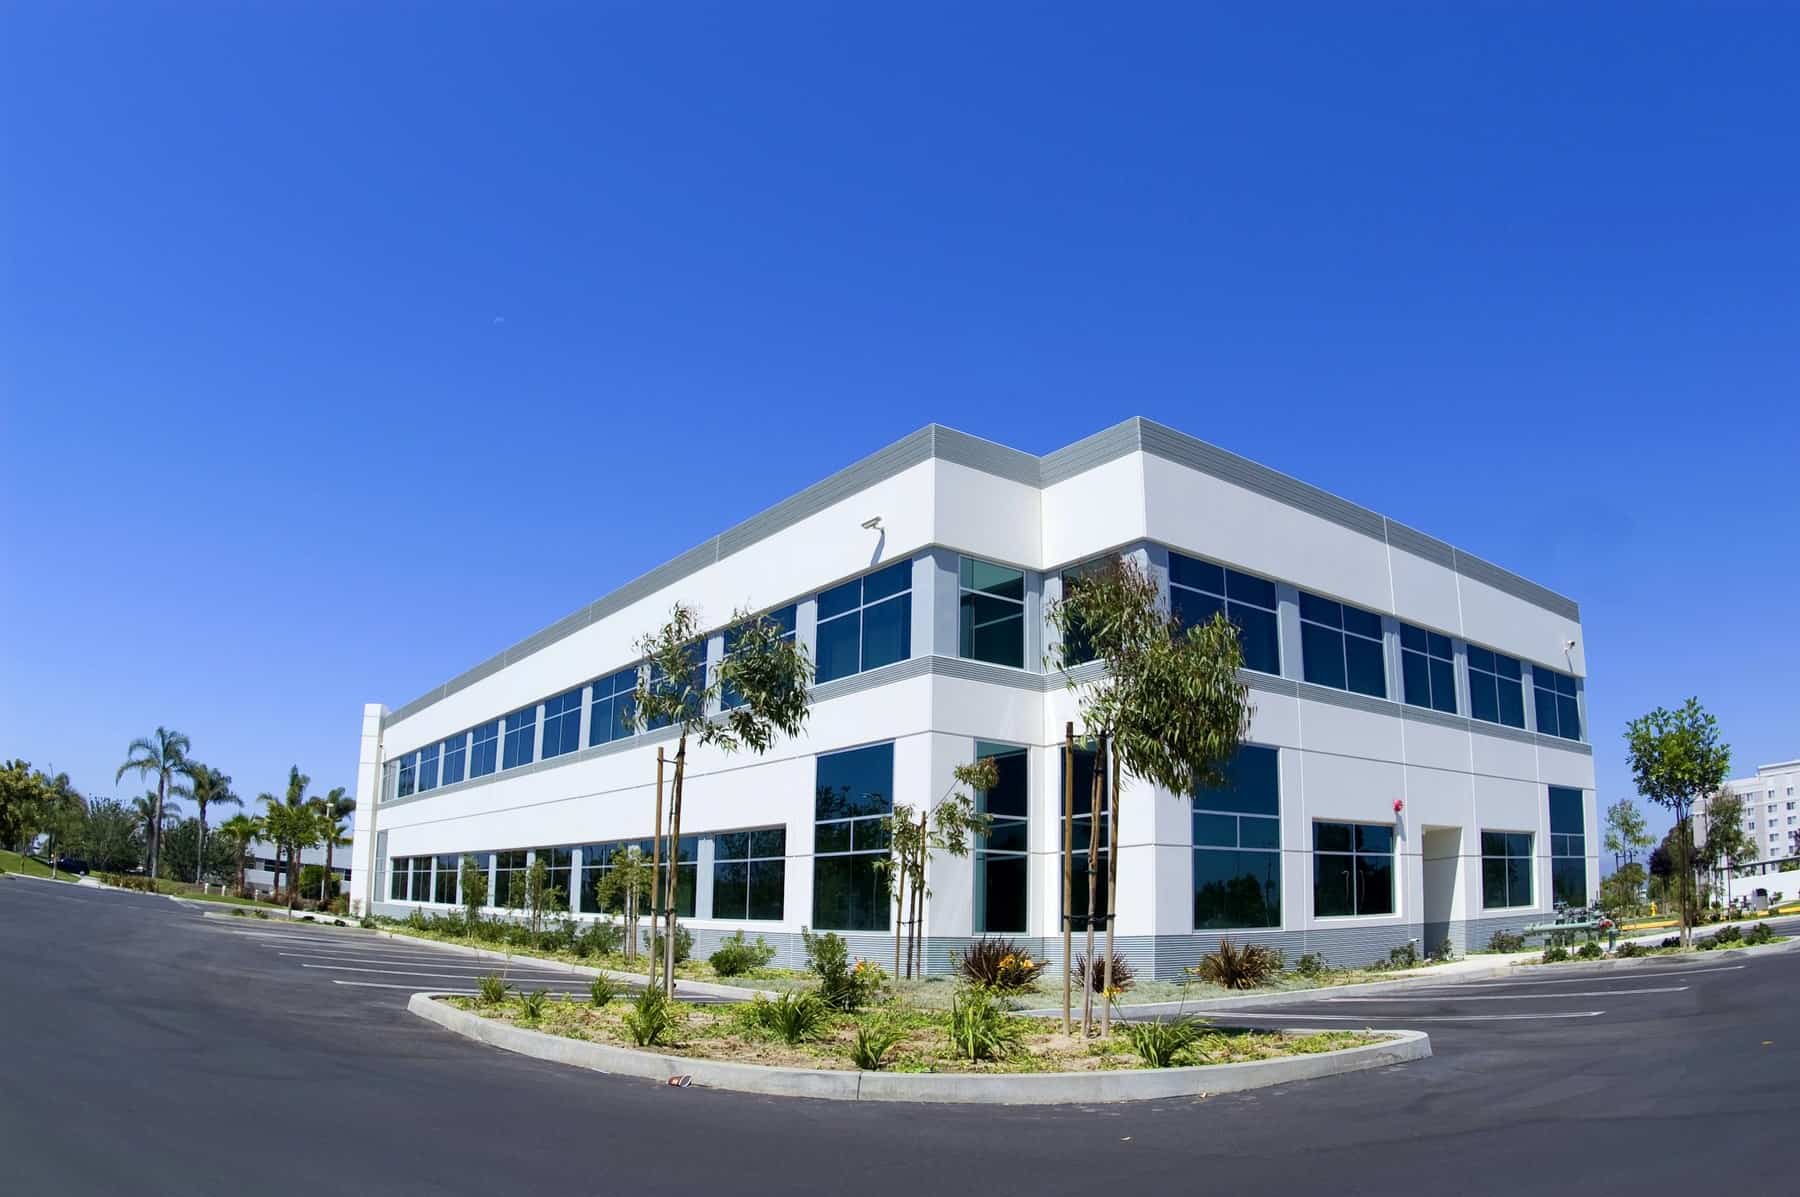 White commercial building with grey accent colors